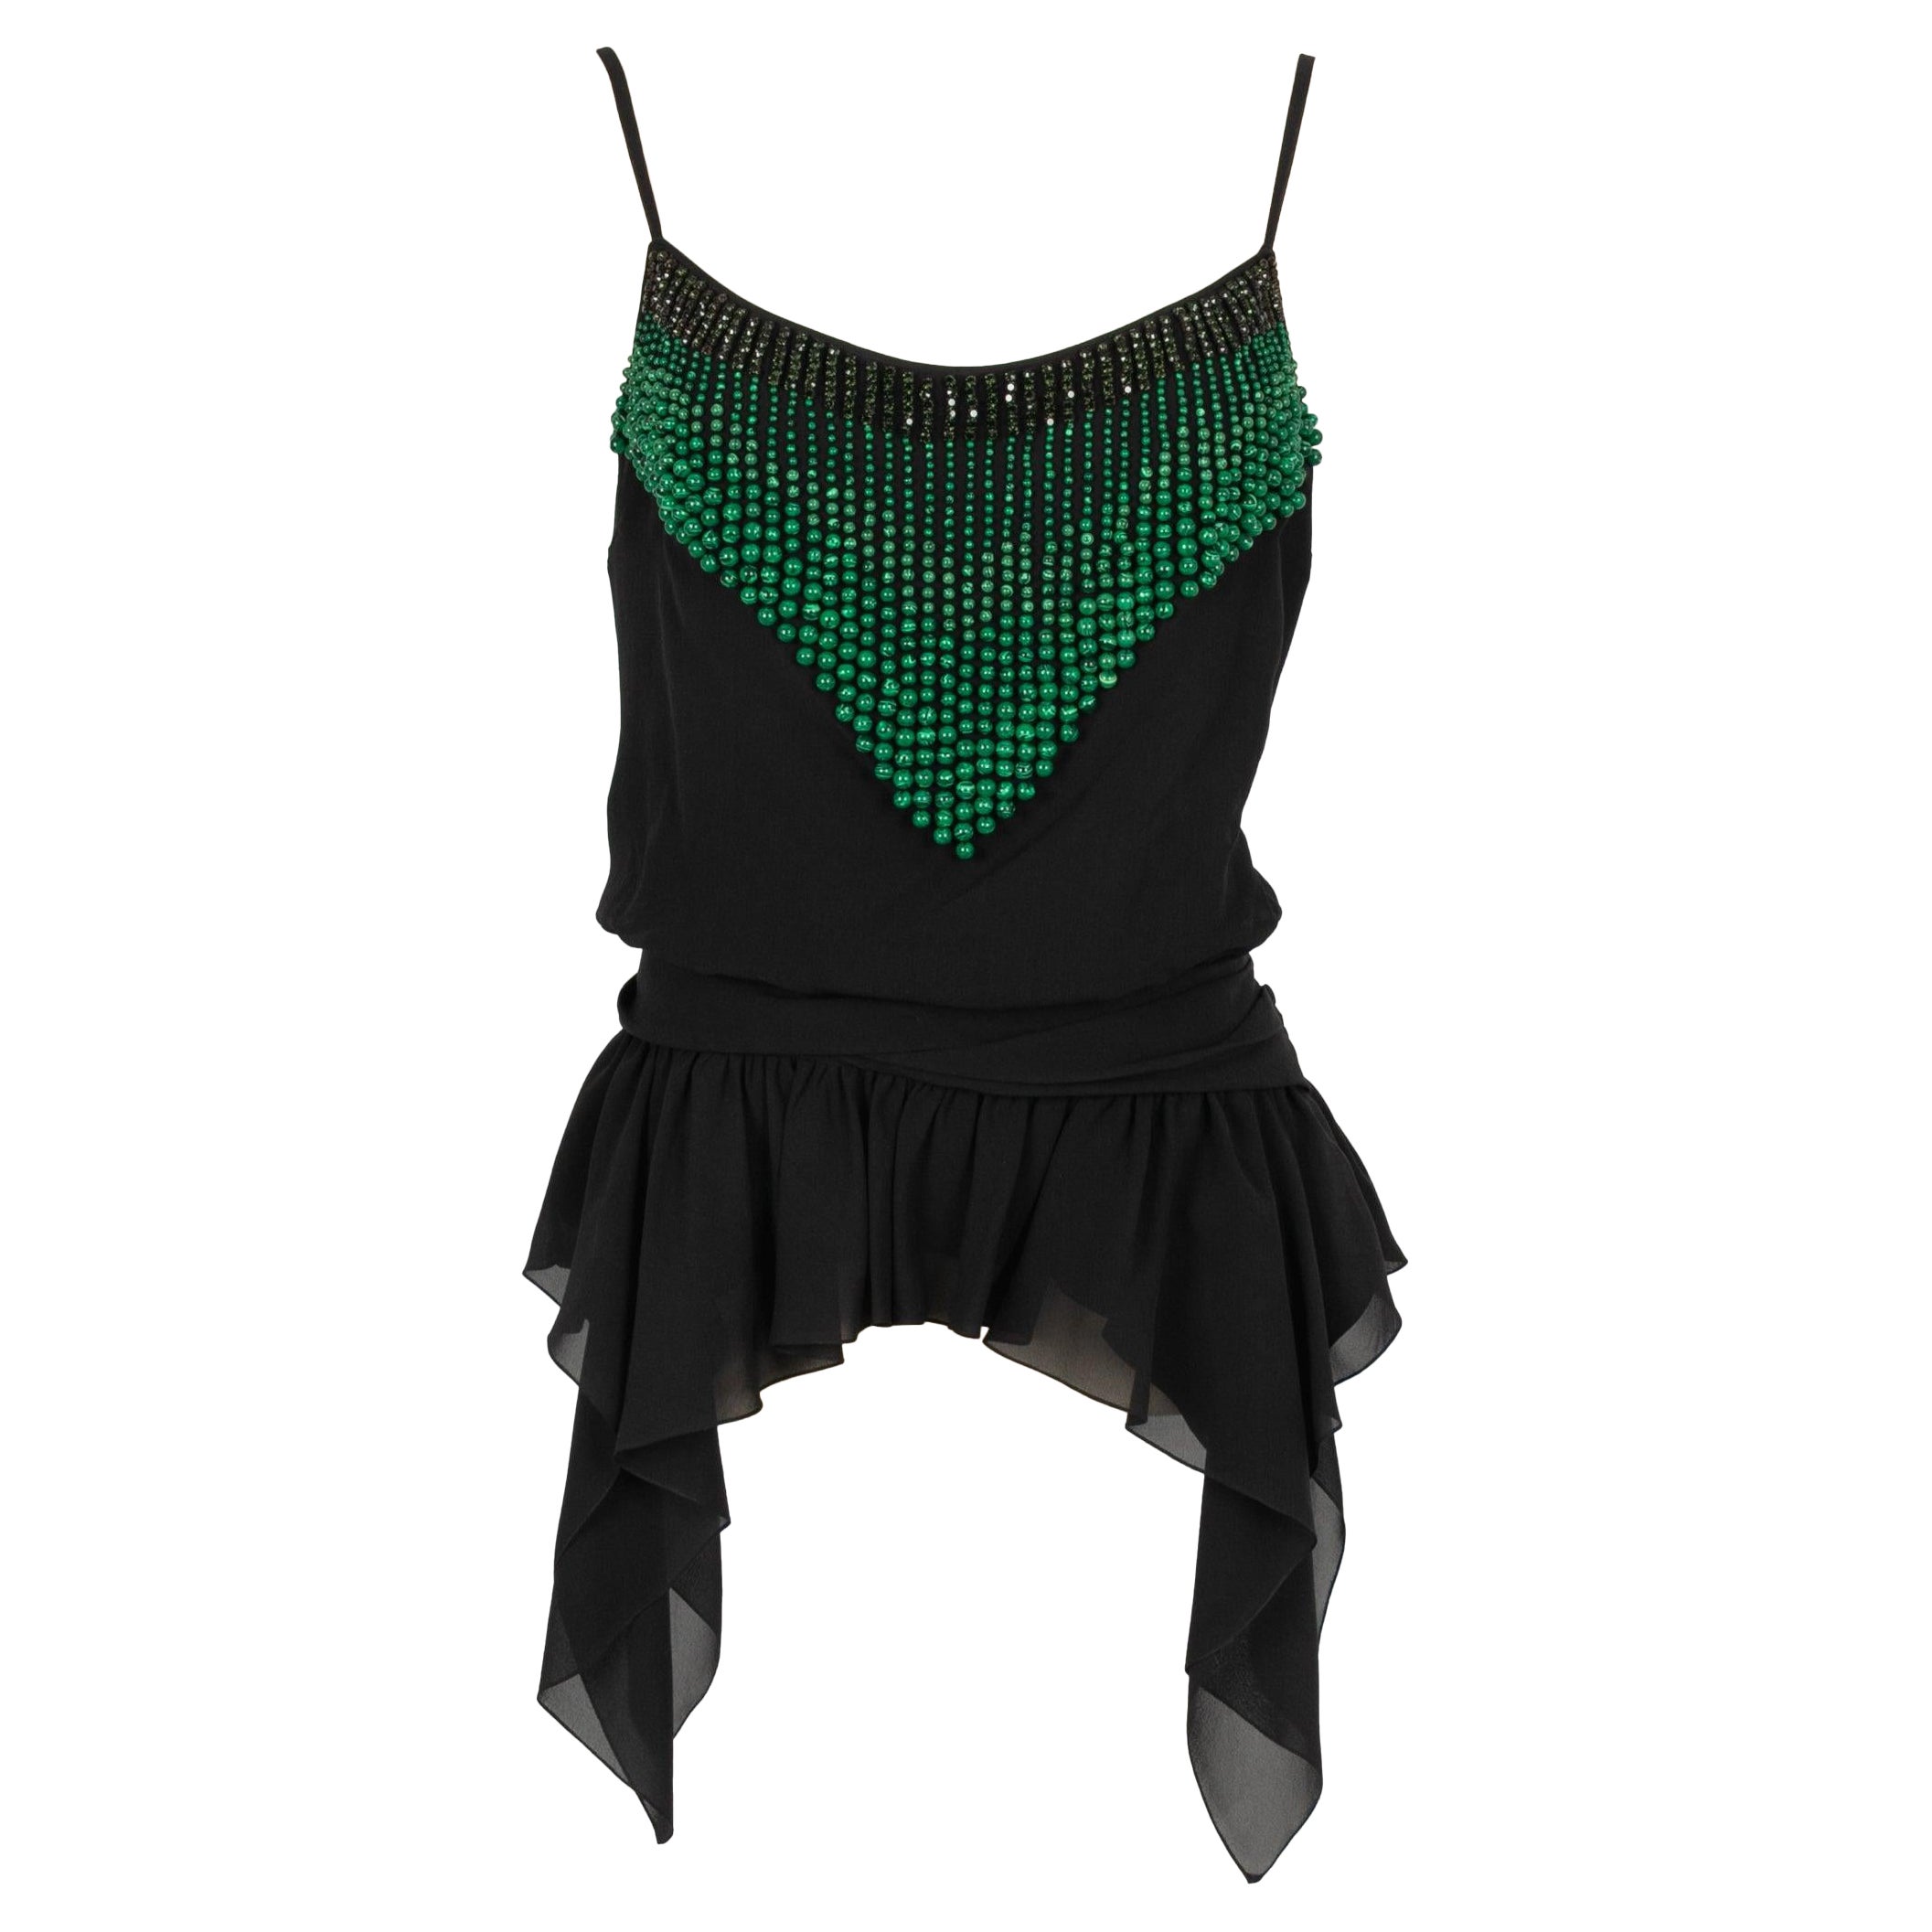 Galliano Black Top Ornamented with Pearl and Green Rhinestones